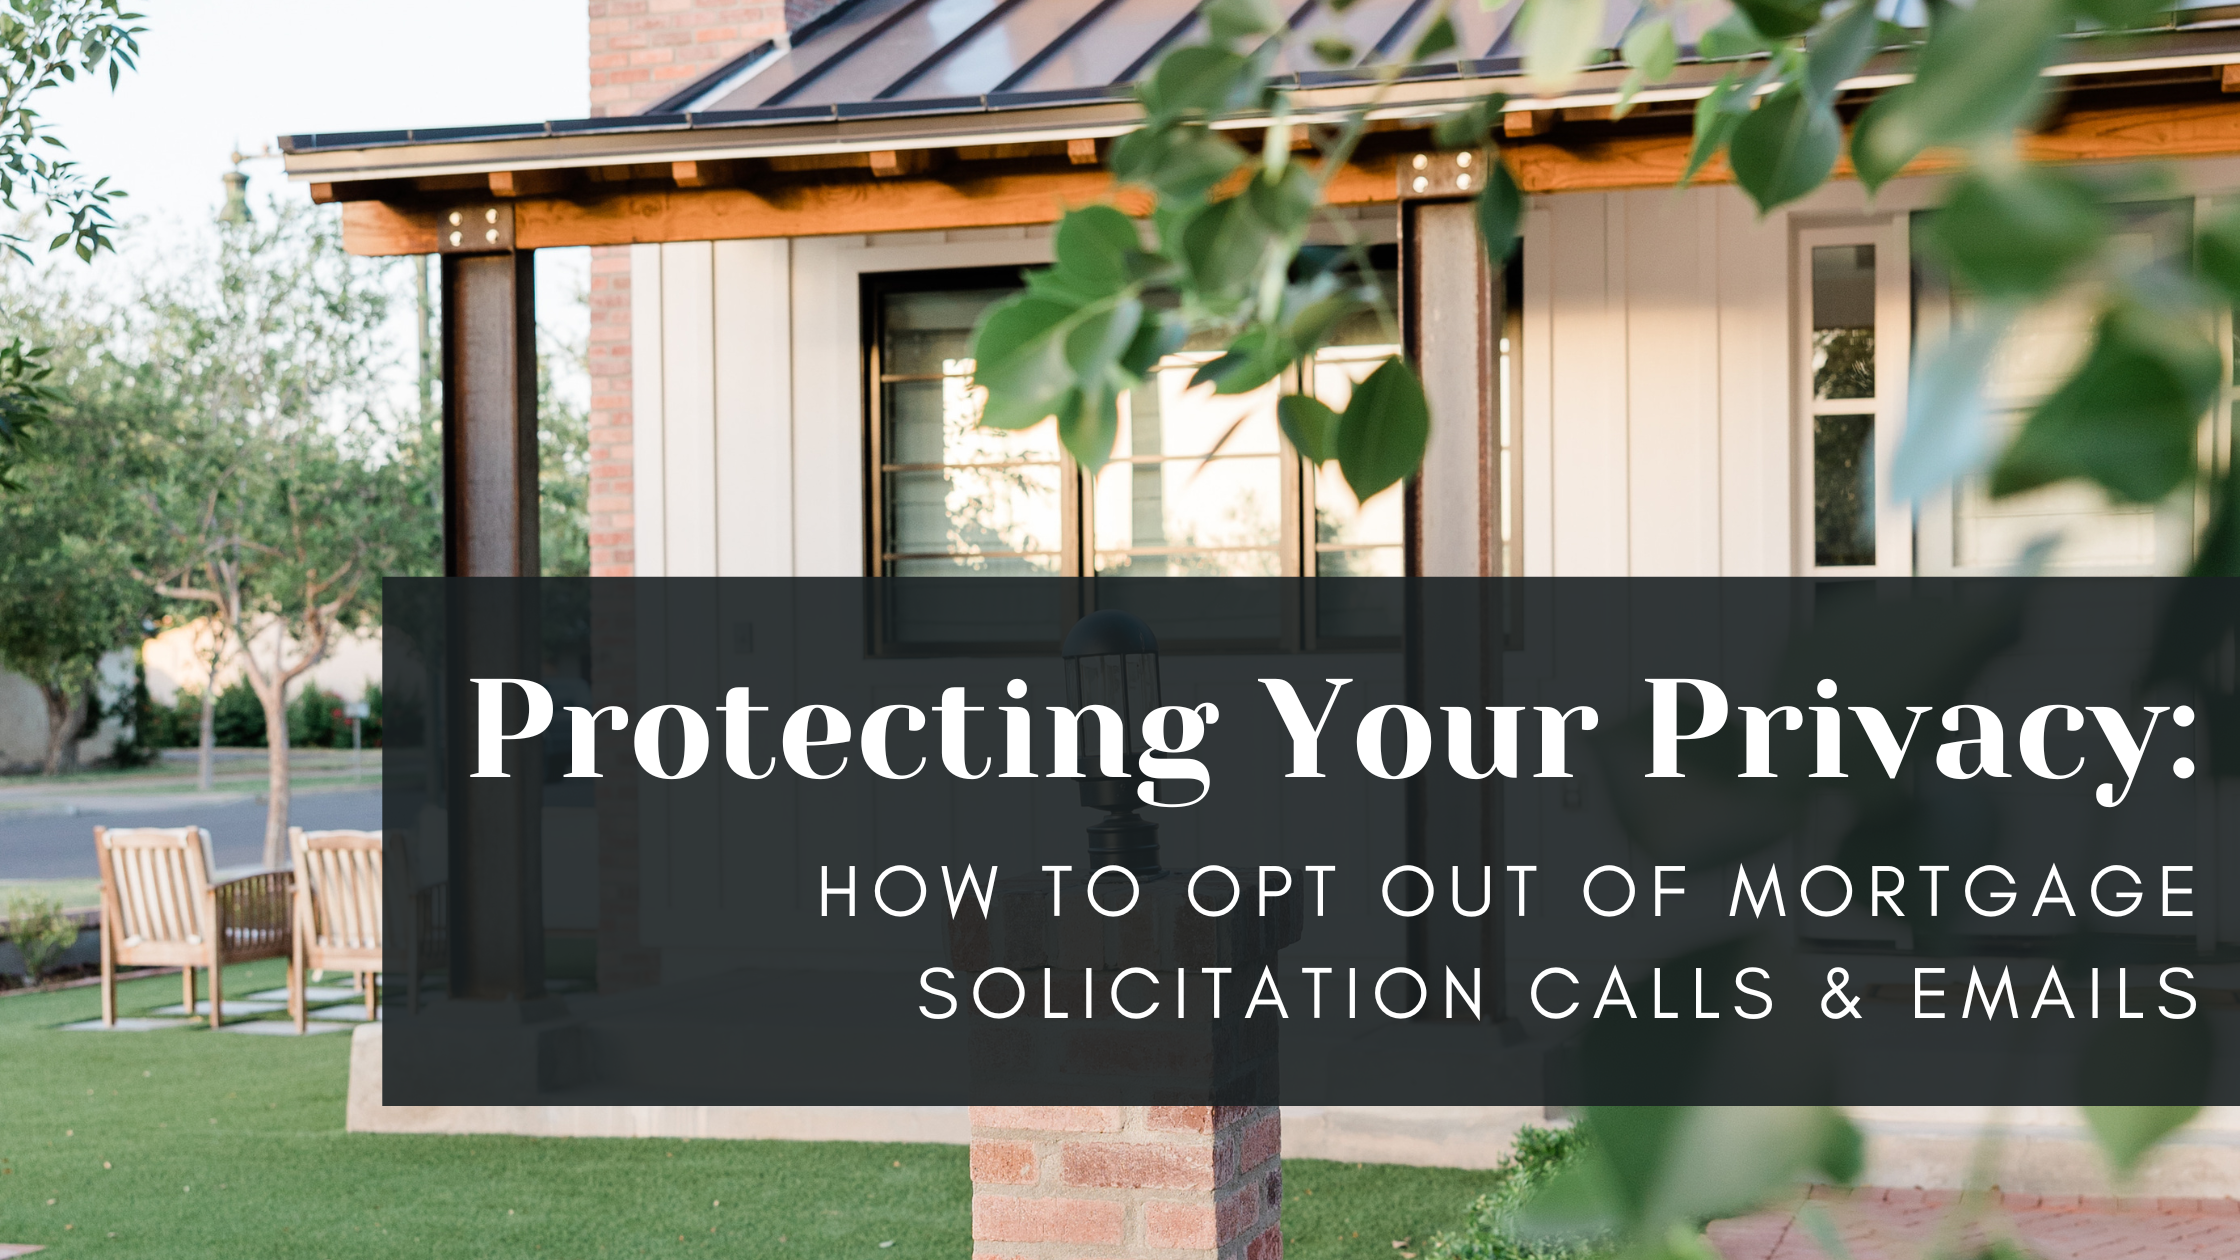 Protecting Your Privacy: How to Opt Out of Mortgage Solicitation Calls and Emails